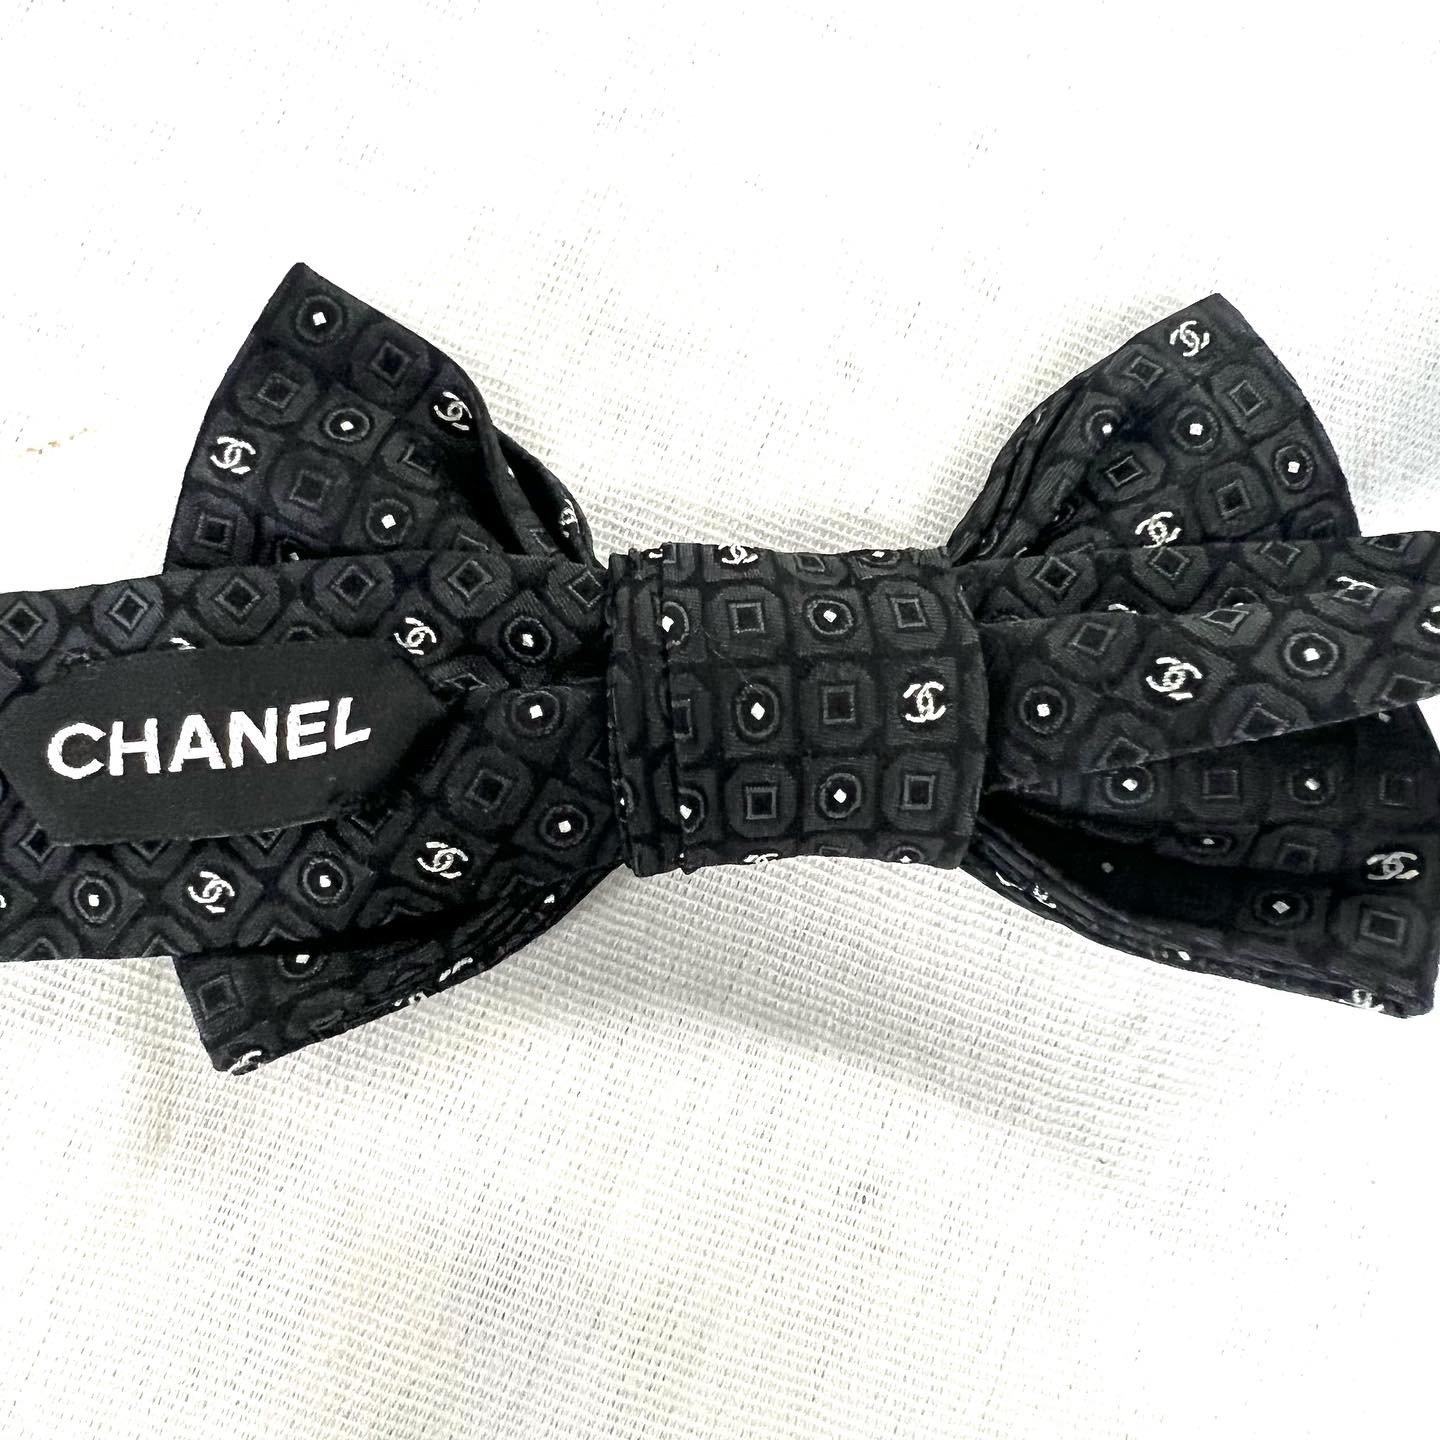 Chanel bow tie - Closet Couture